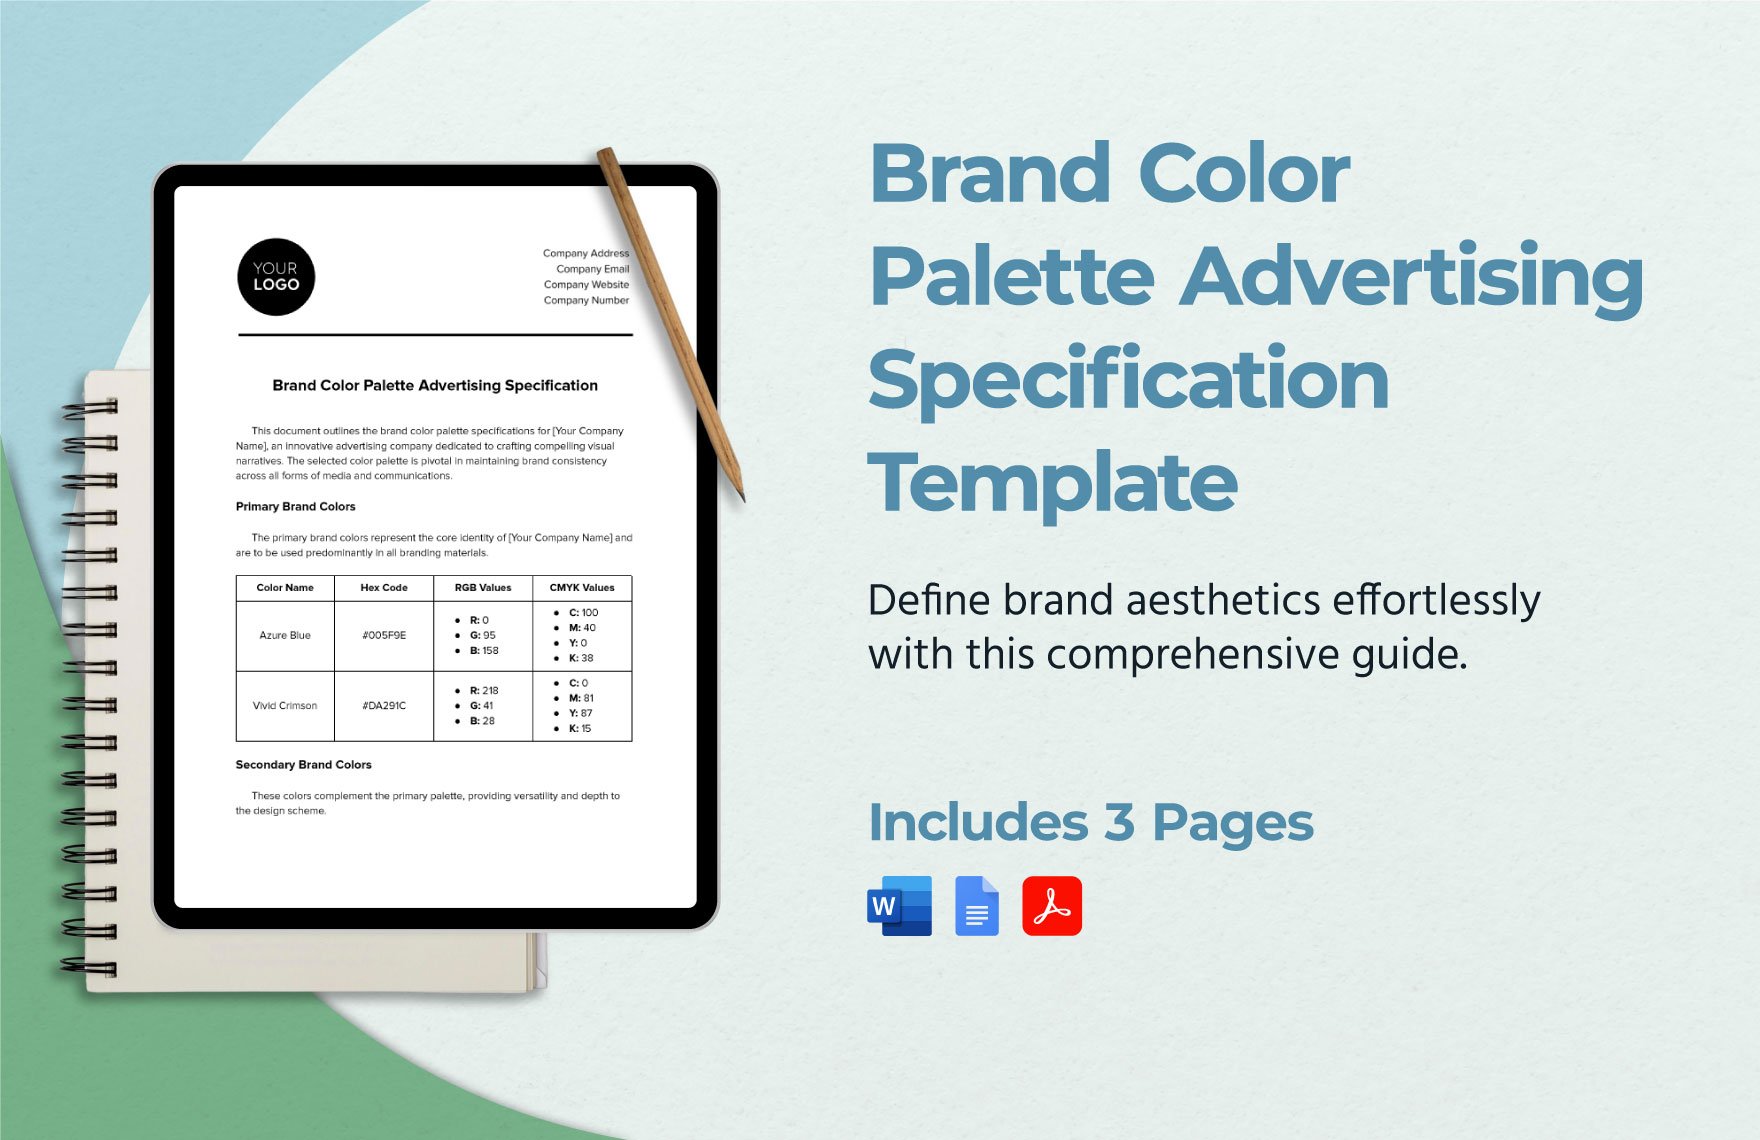 Brand Color Palette Advertising Specification Template in Word, Google Docs, PDF